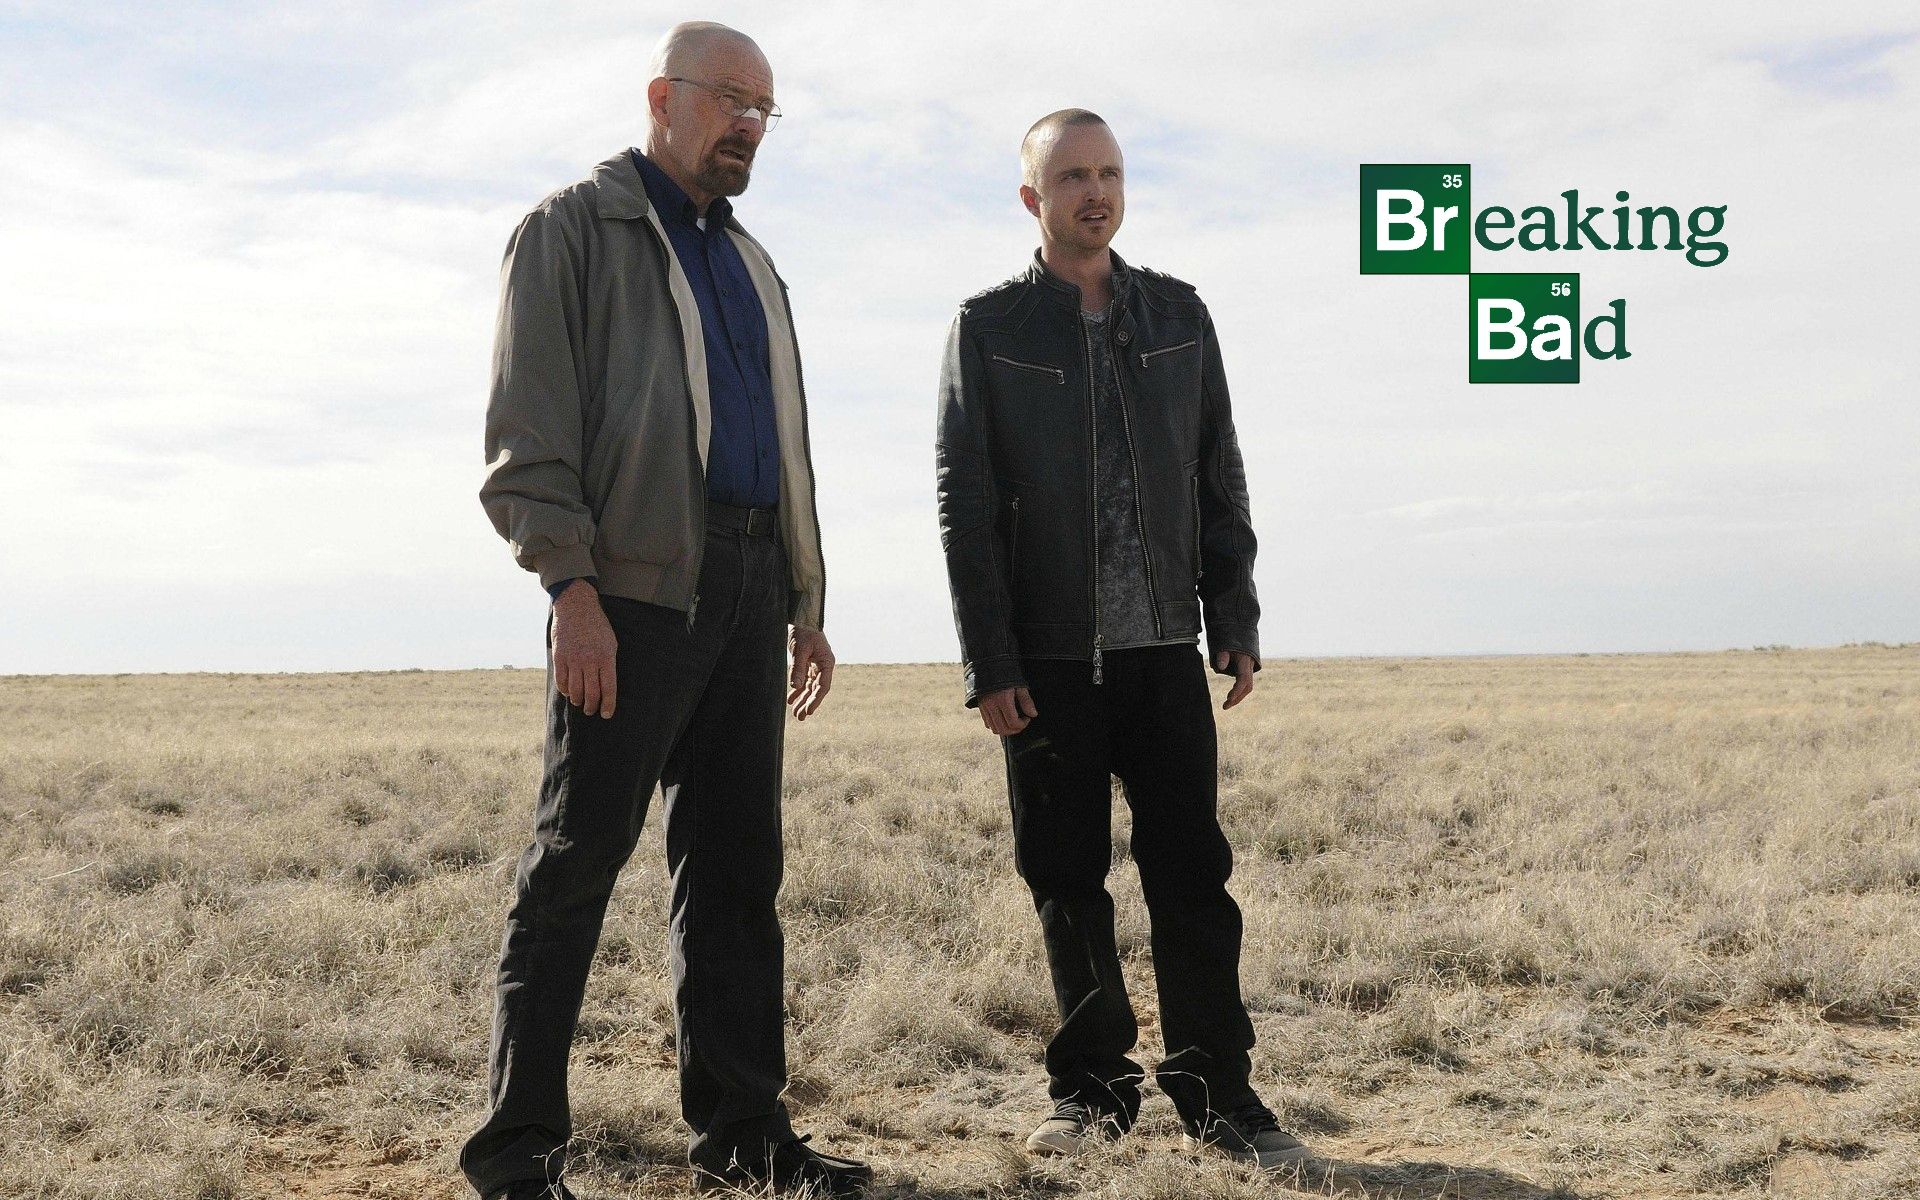 Download High quality A Breaking Bad wallpaper / TV Serials / 1920x1200